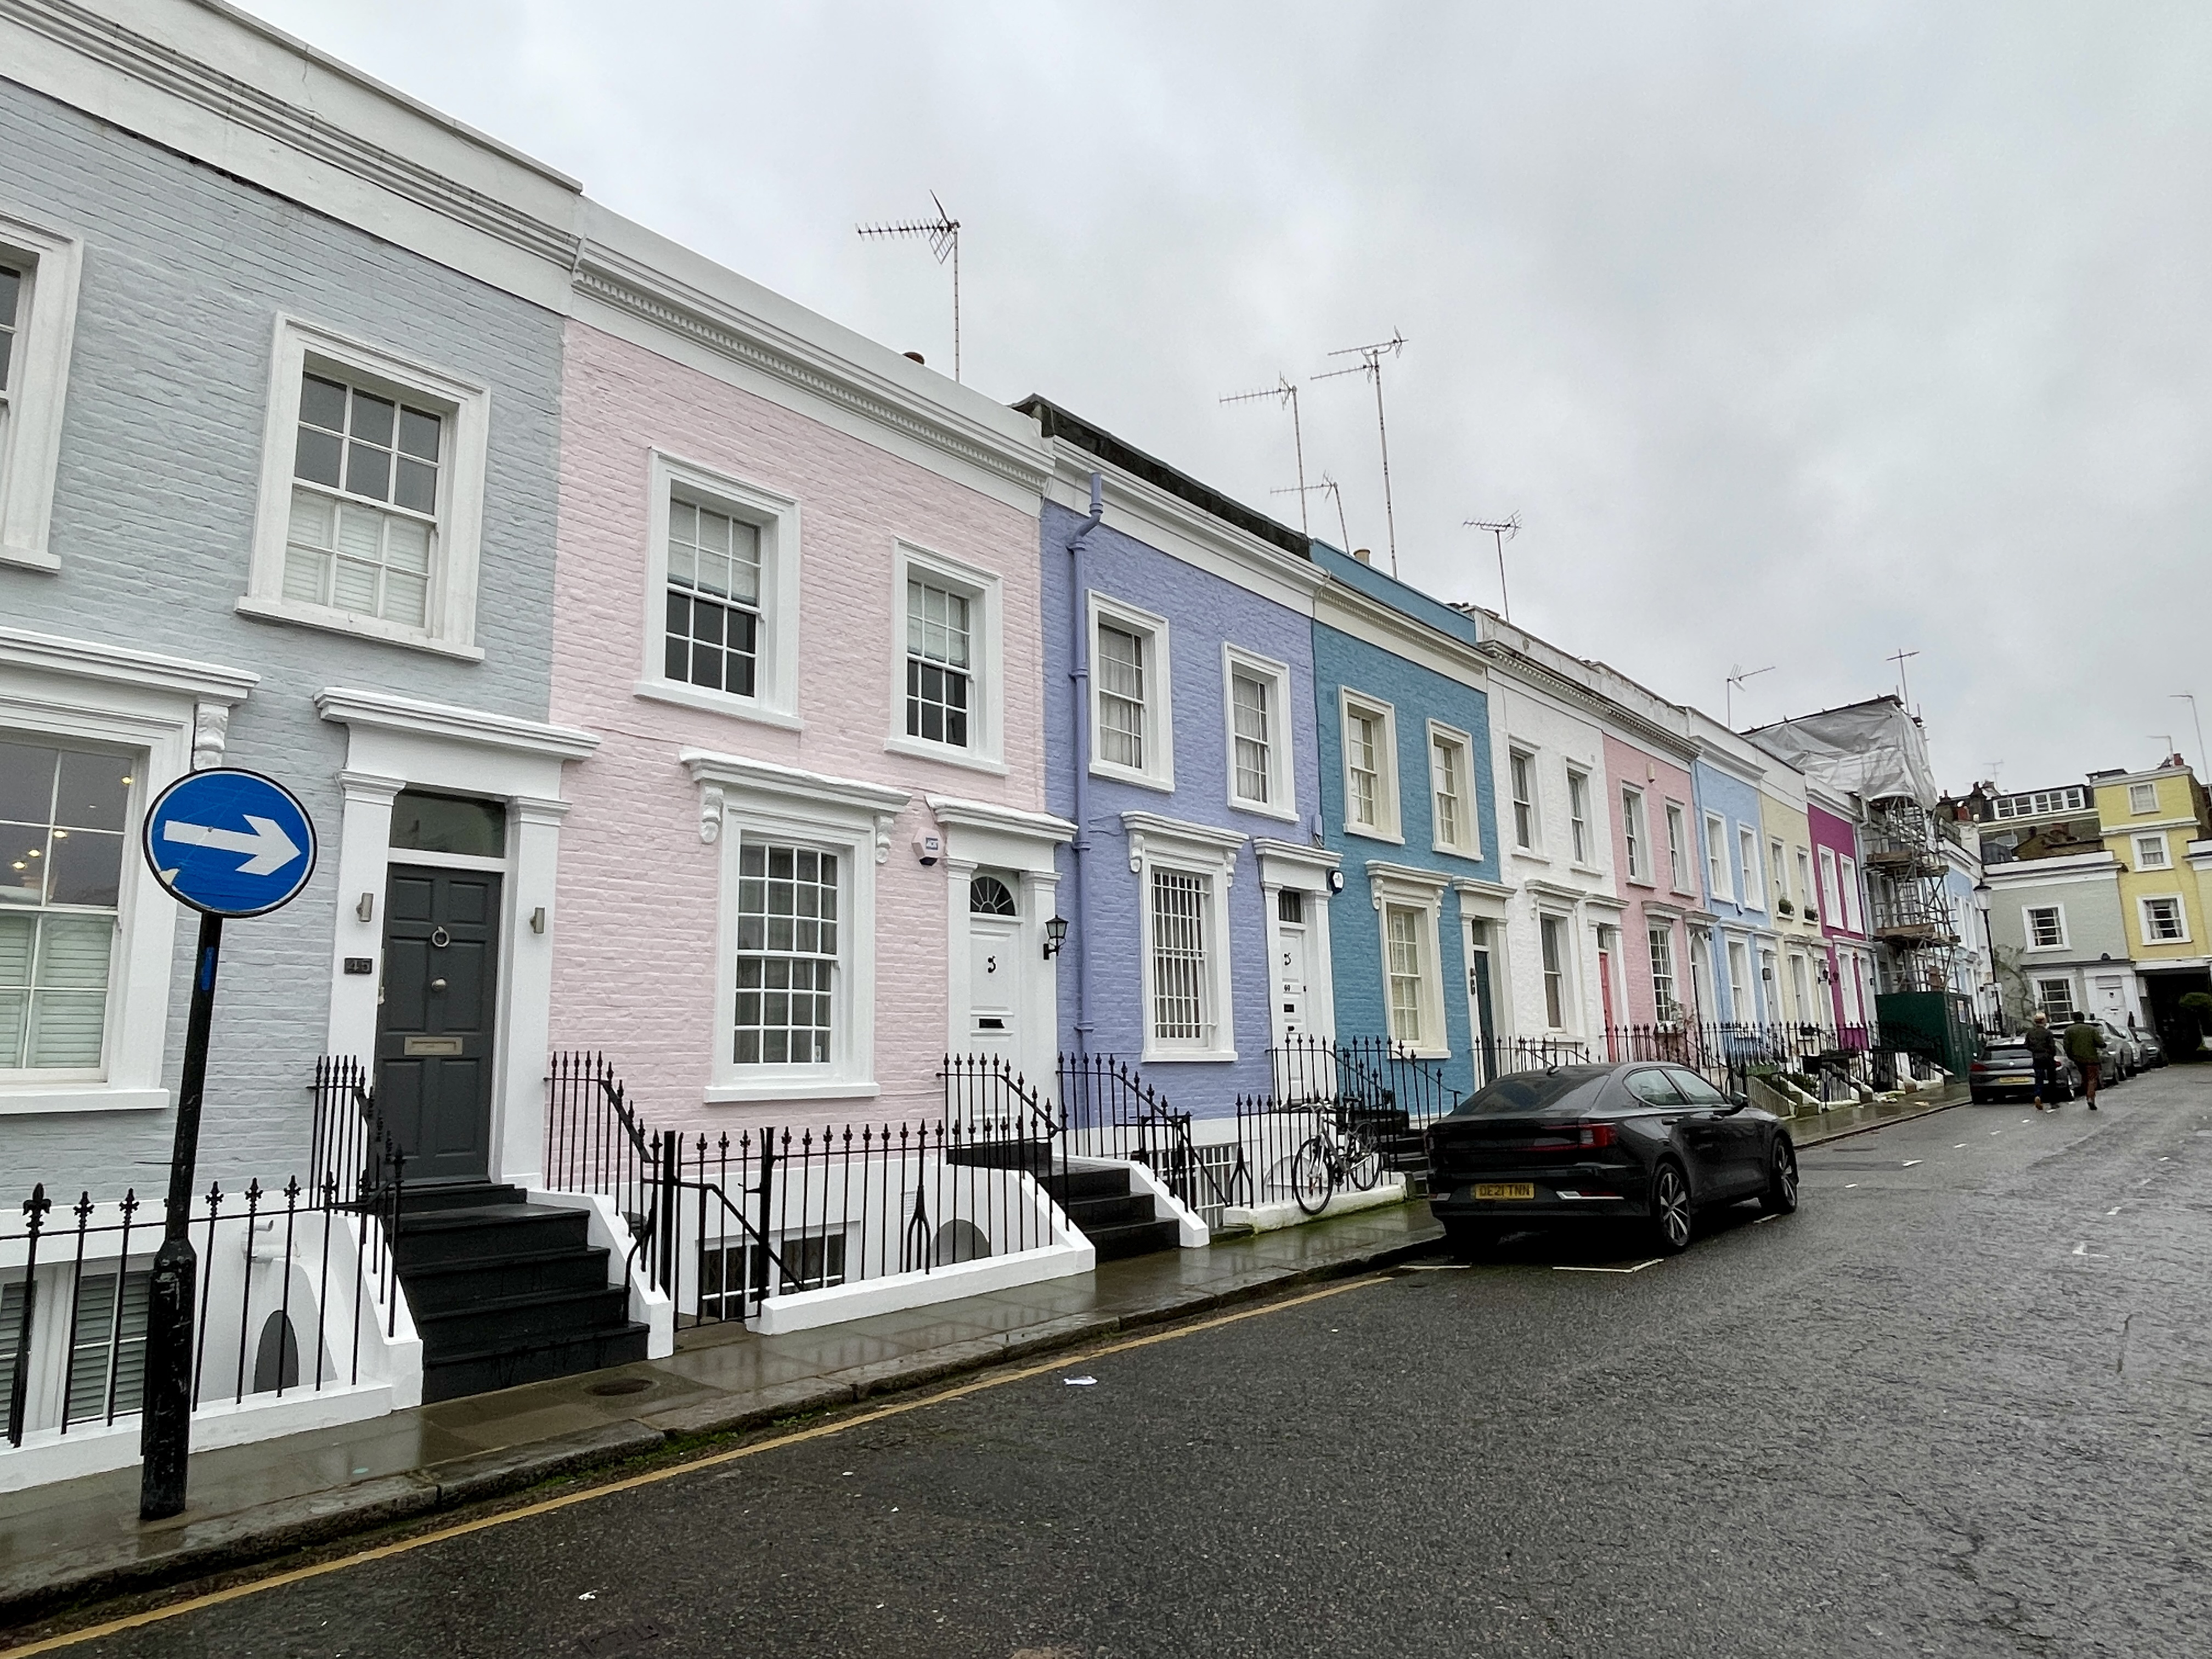 The Hillgate Village Residents Association says the pastel colours make the homes 'one of the most photogenic streets in London'